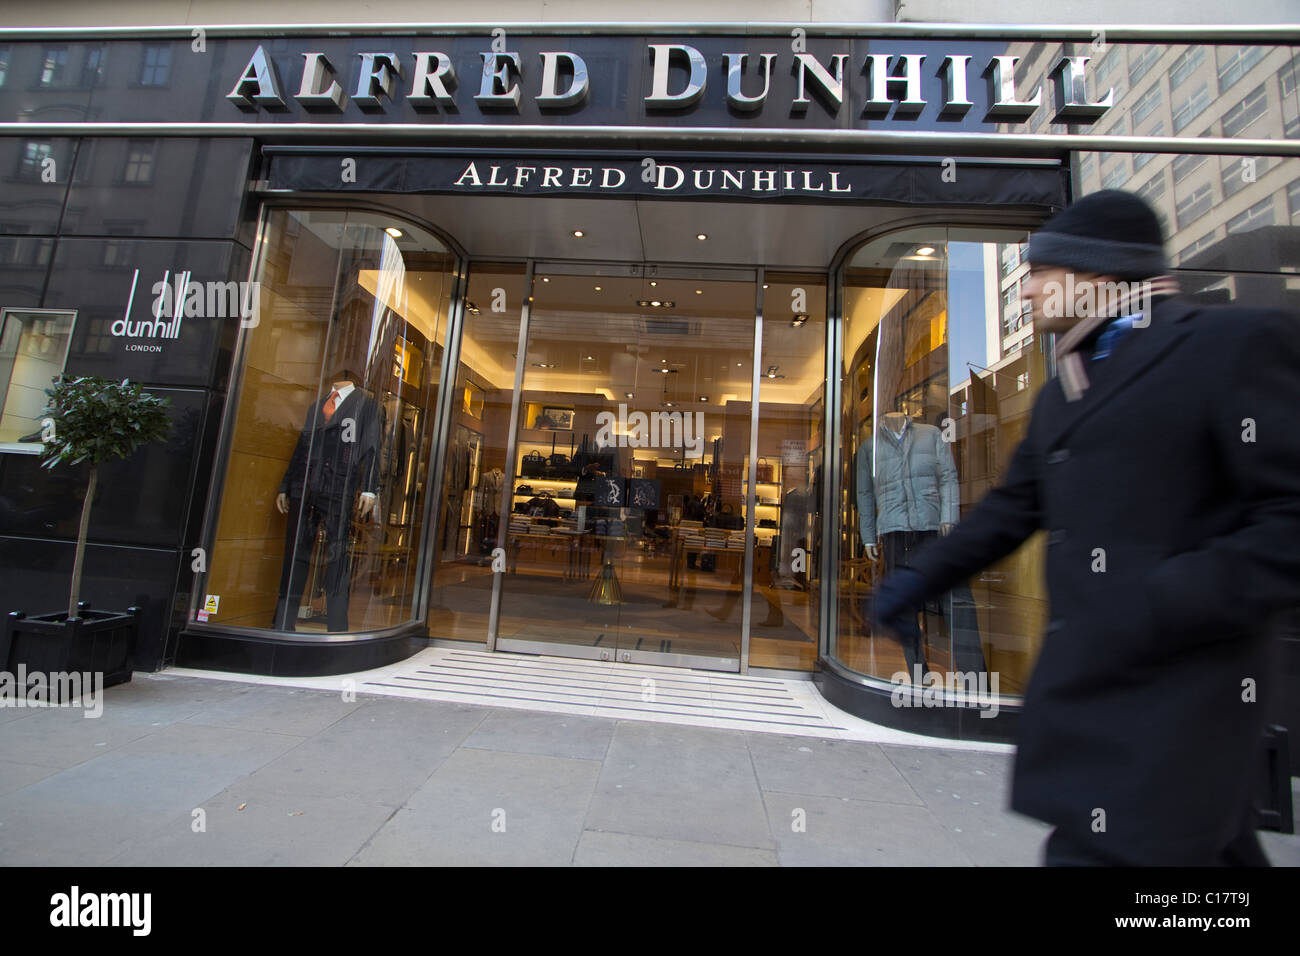 Alfred Dunhill clothing Retailer jermyn street Stock Photo